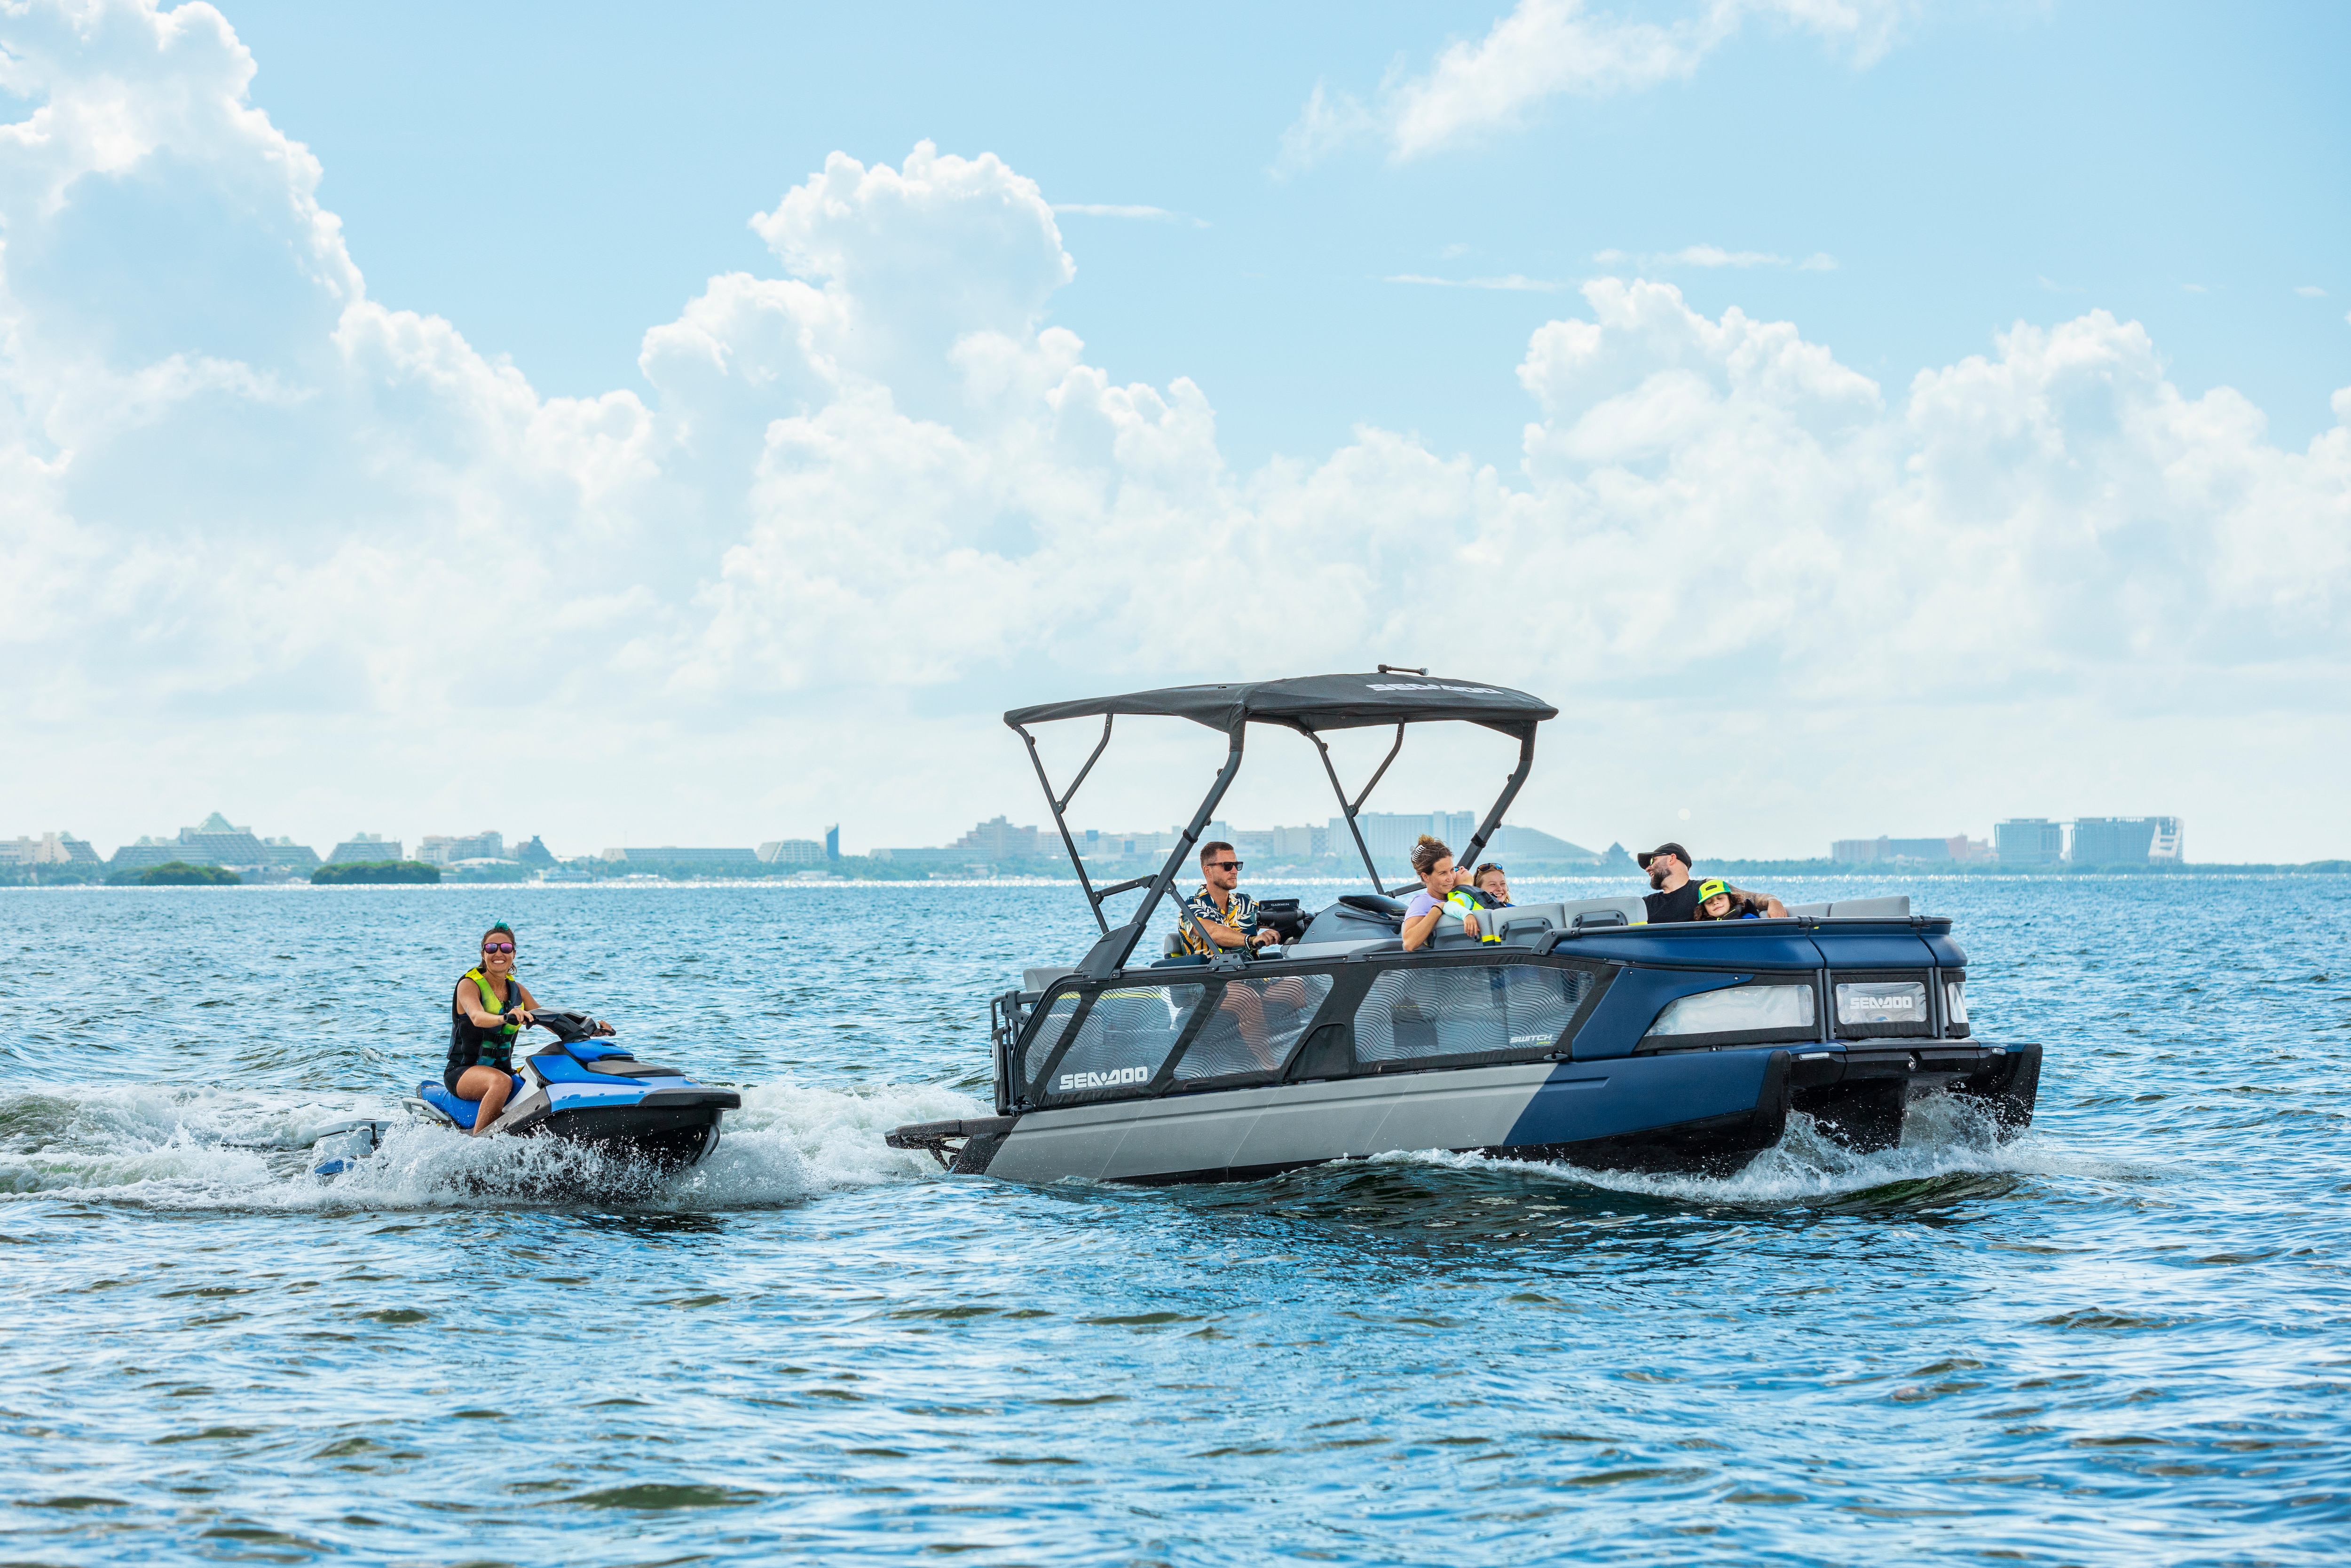 Sea-Doo personal watercraft and Switch pontoon riding side by side